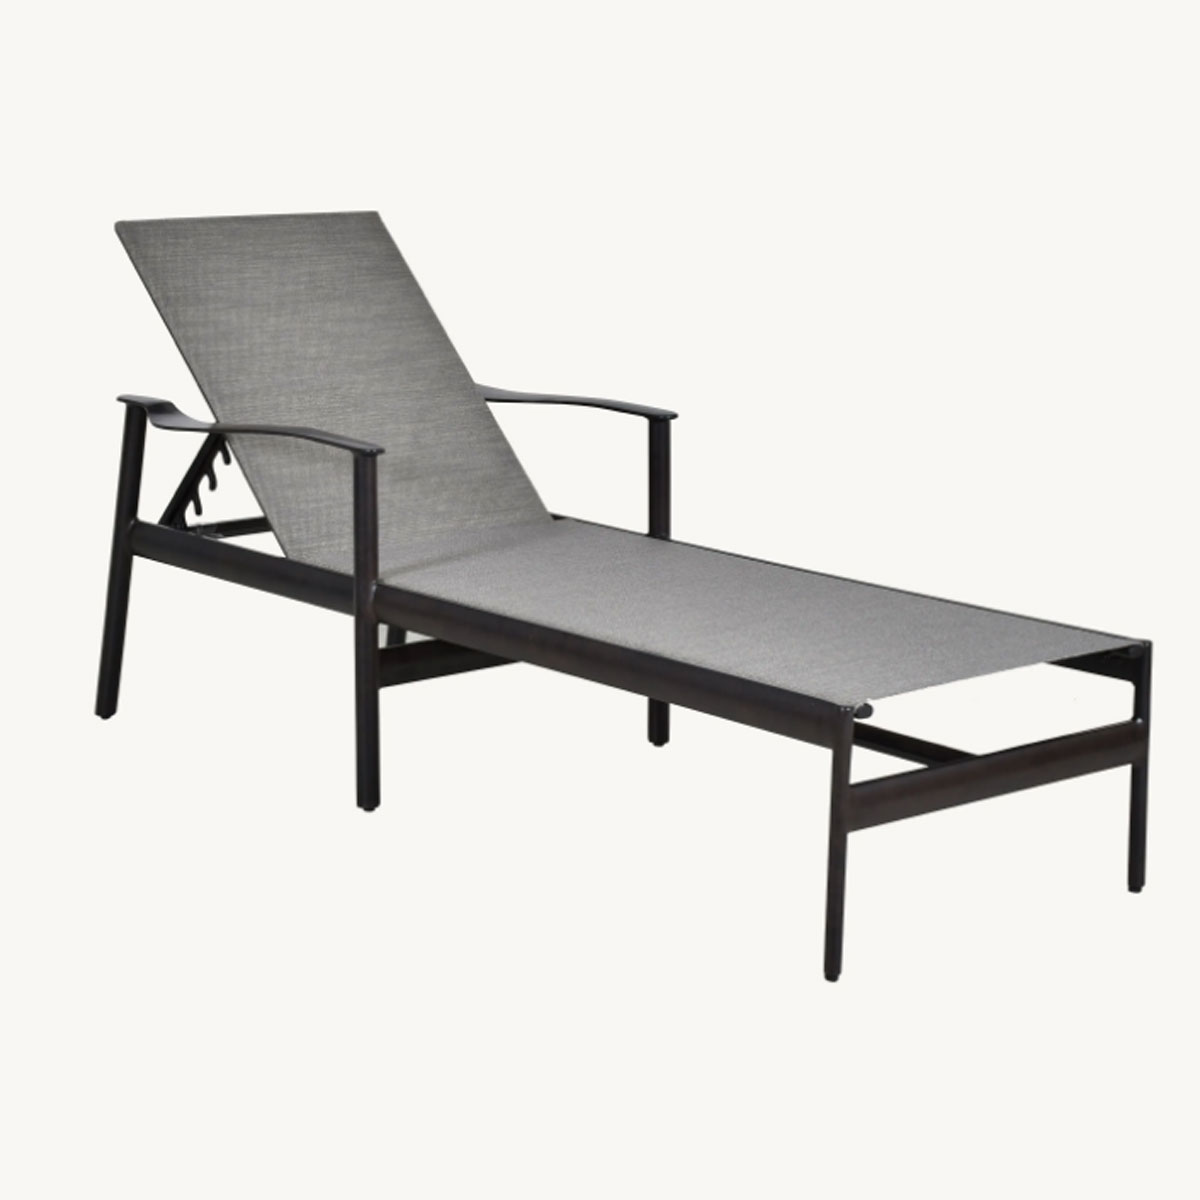 Castelle Barbados Sling Chaise Lounge